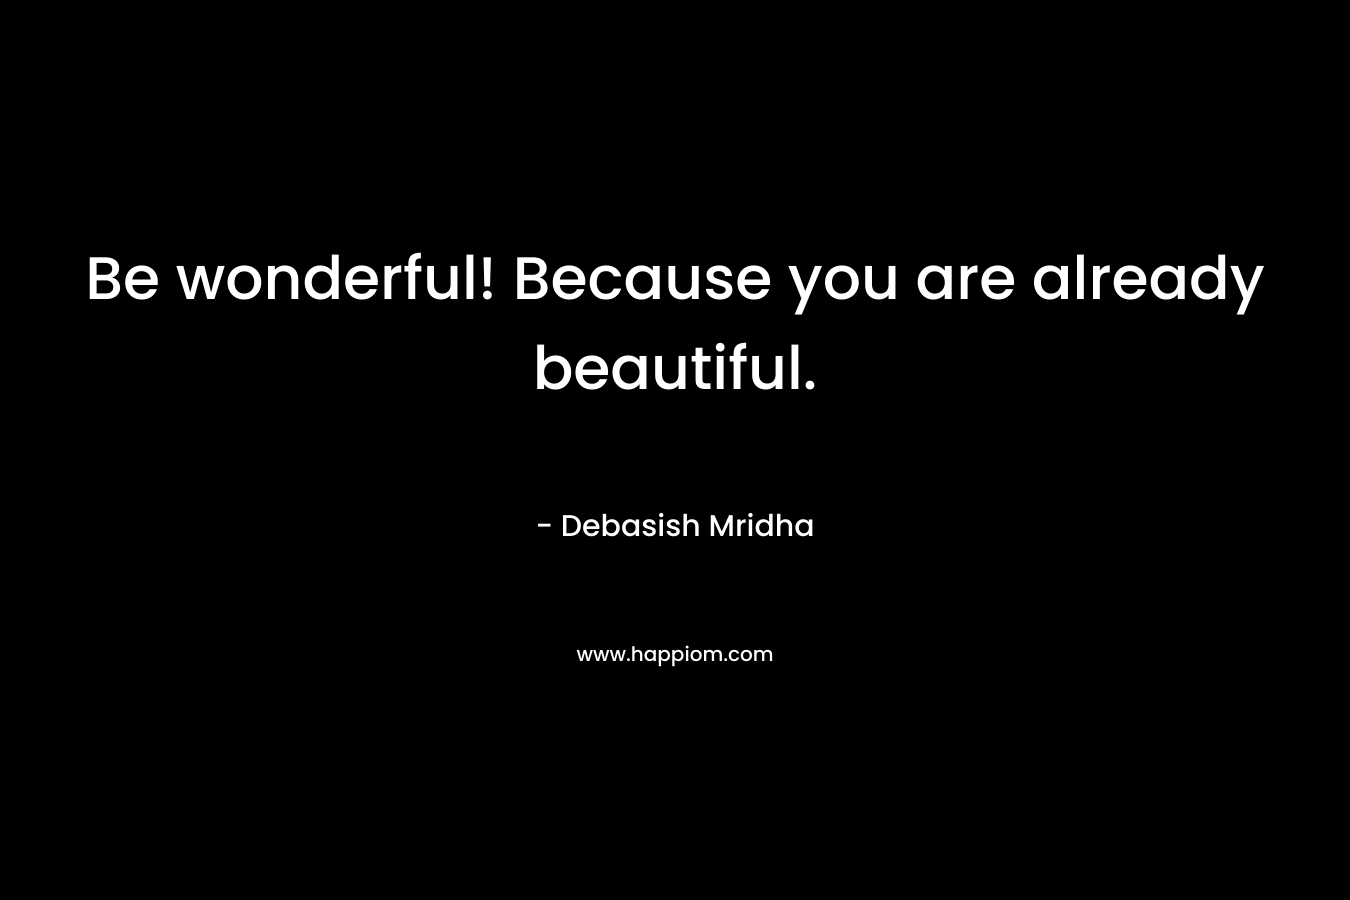 Be wonderful! Because you are already beautiful.